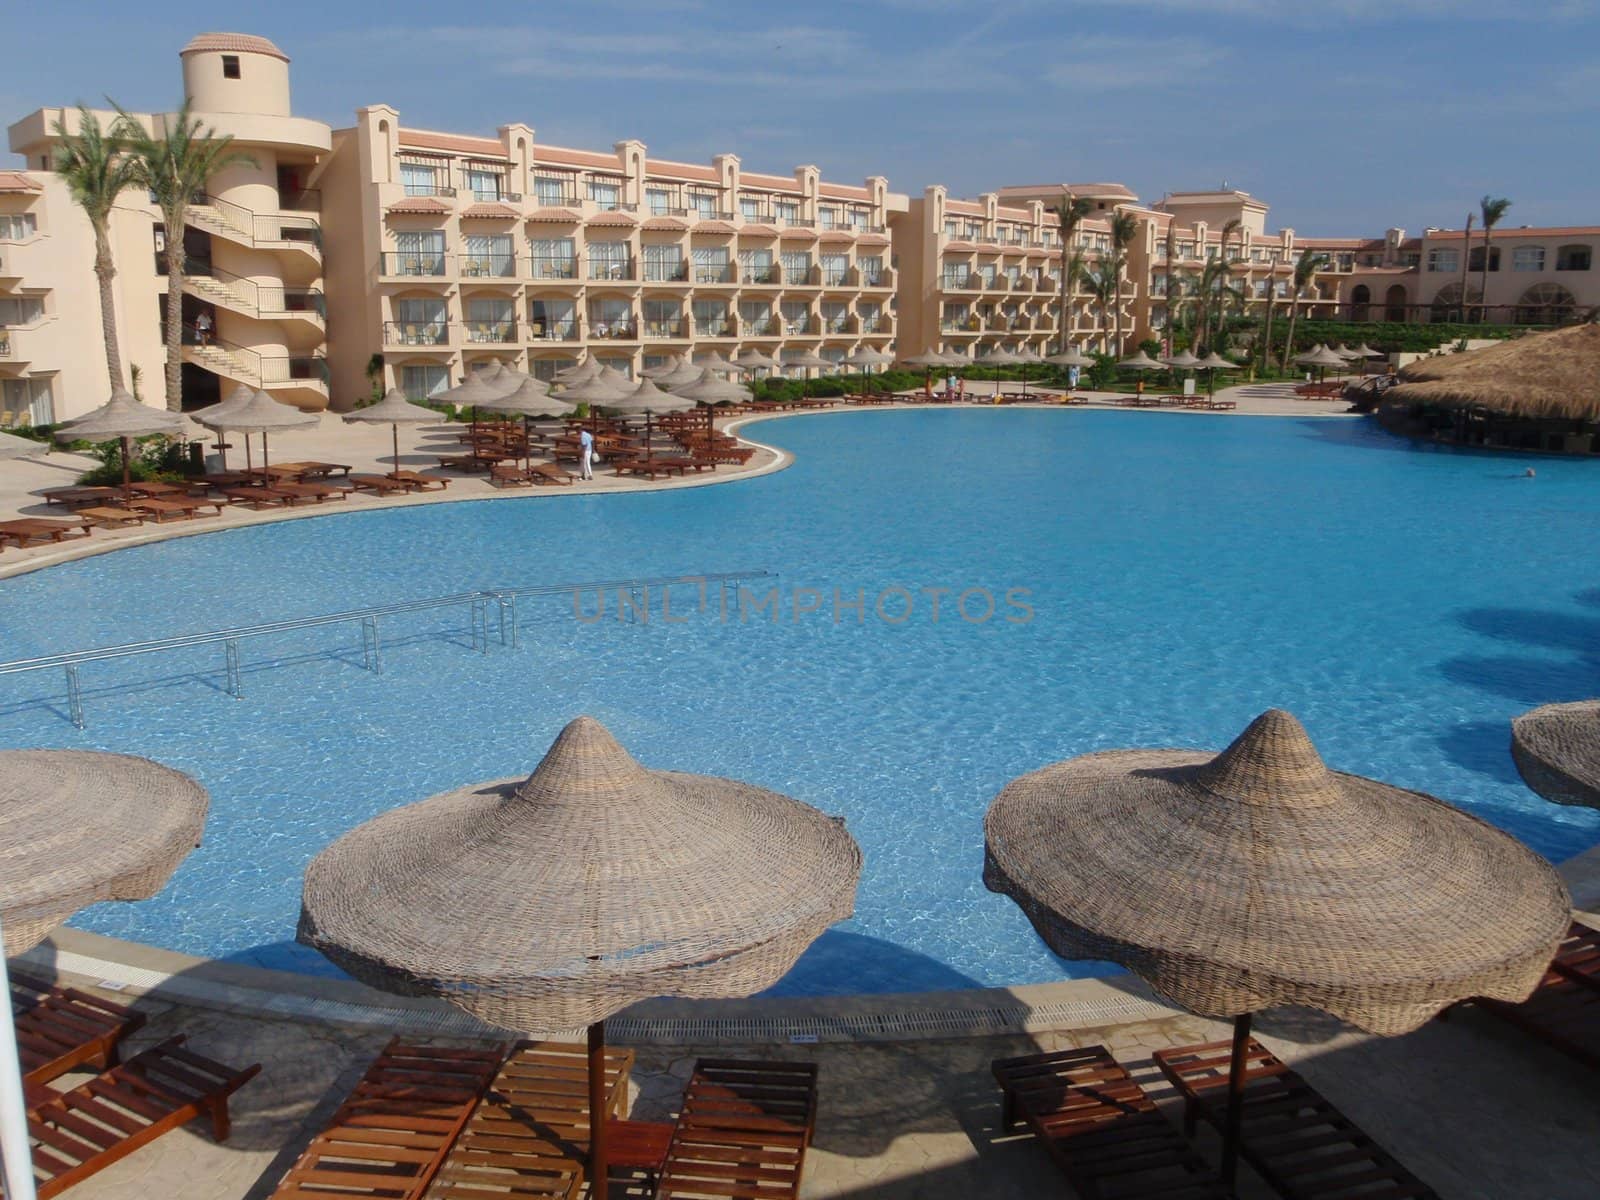 One of the hotels of Sharm El Sheikh, Egypt